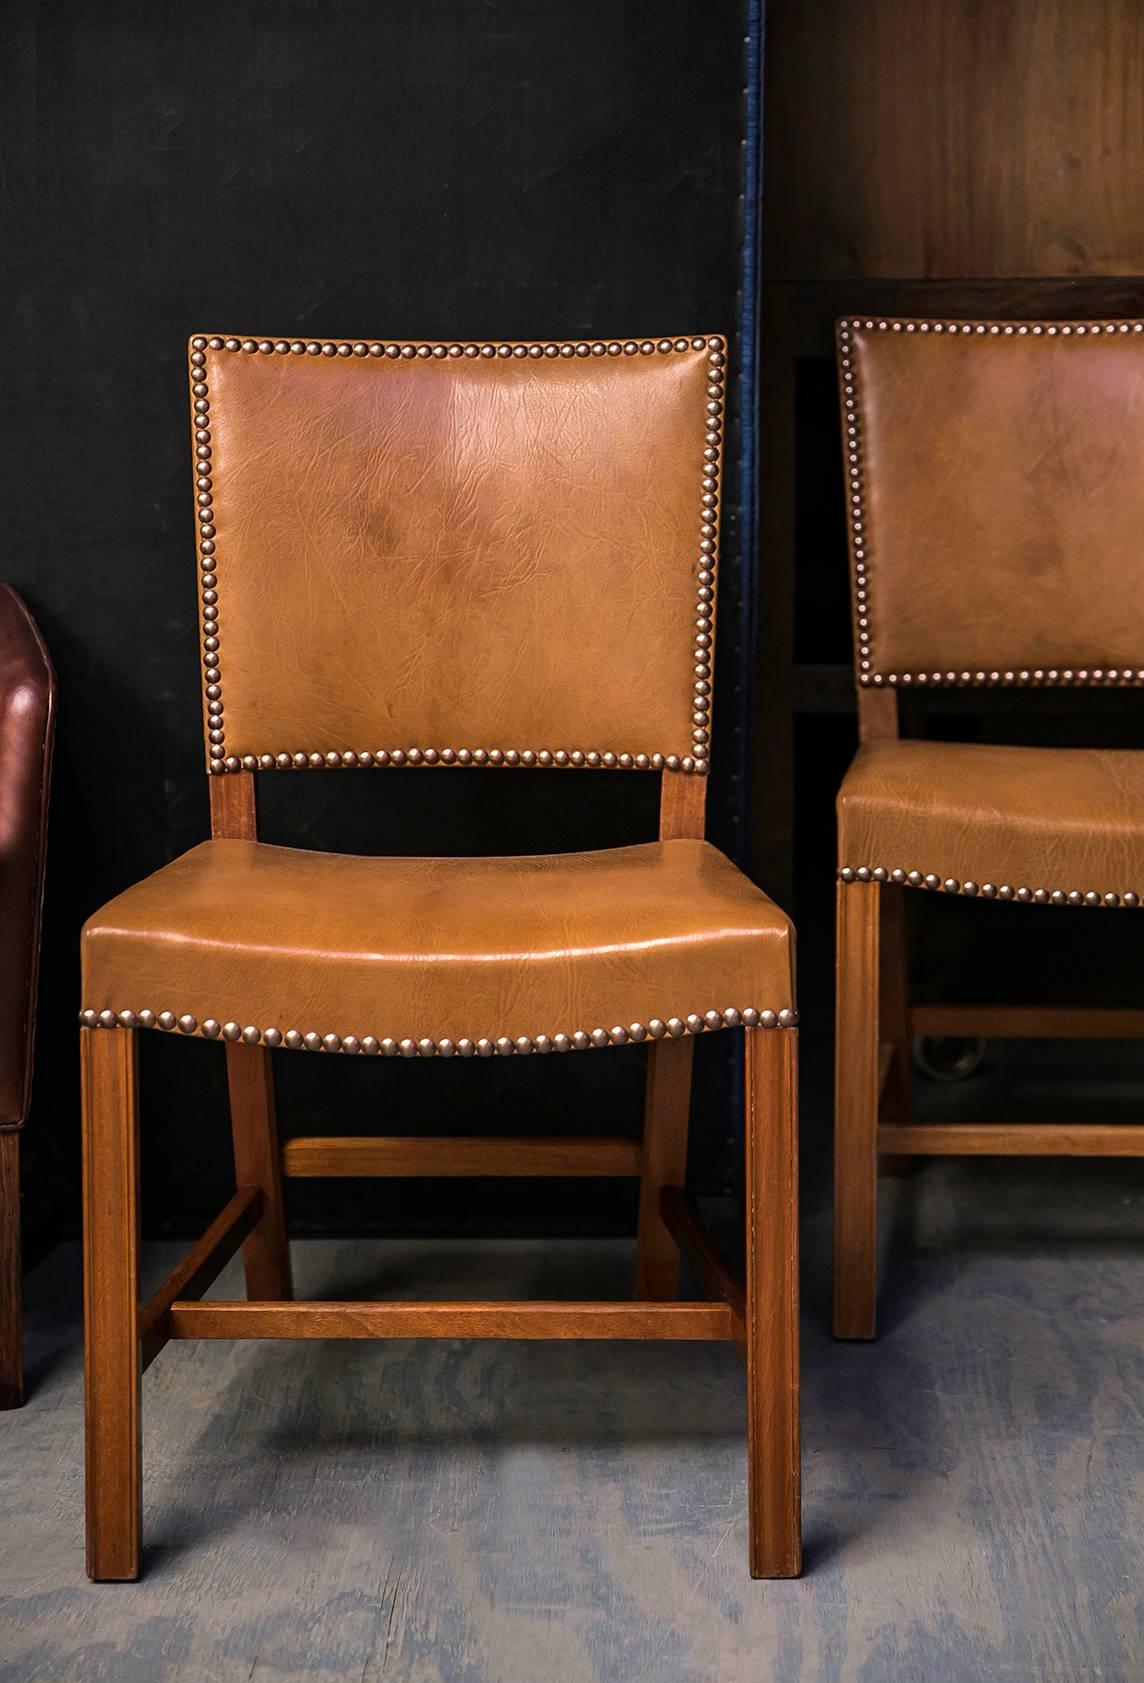 This highly coveted set of chairs by Kaare Klint was made by master cabinetmaker Rud Rasmussen in mahogany and the Nigerian goatskin upholstery with brass nails for which Klint was best known. Nigerian goatskin has an expressive texture that is